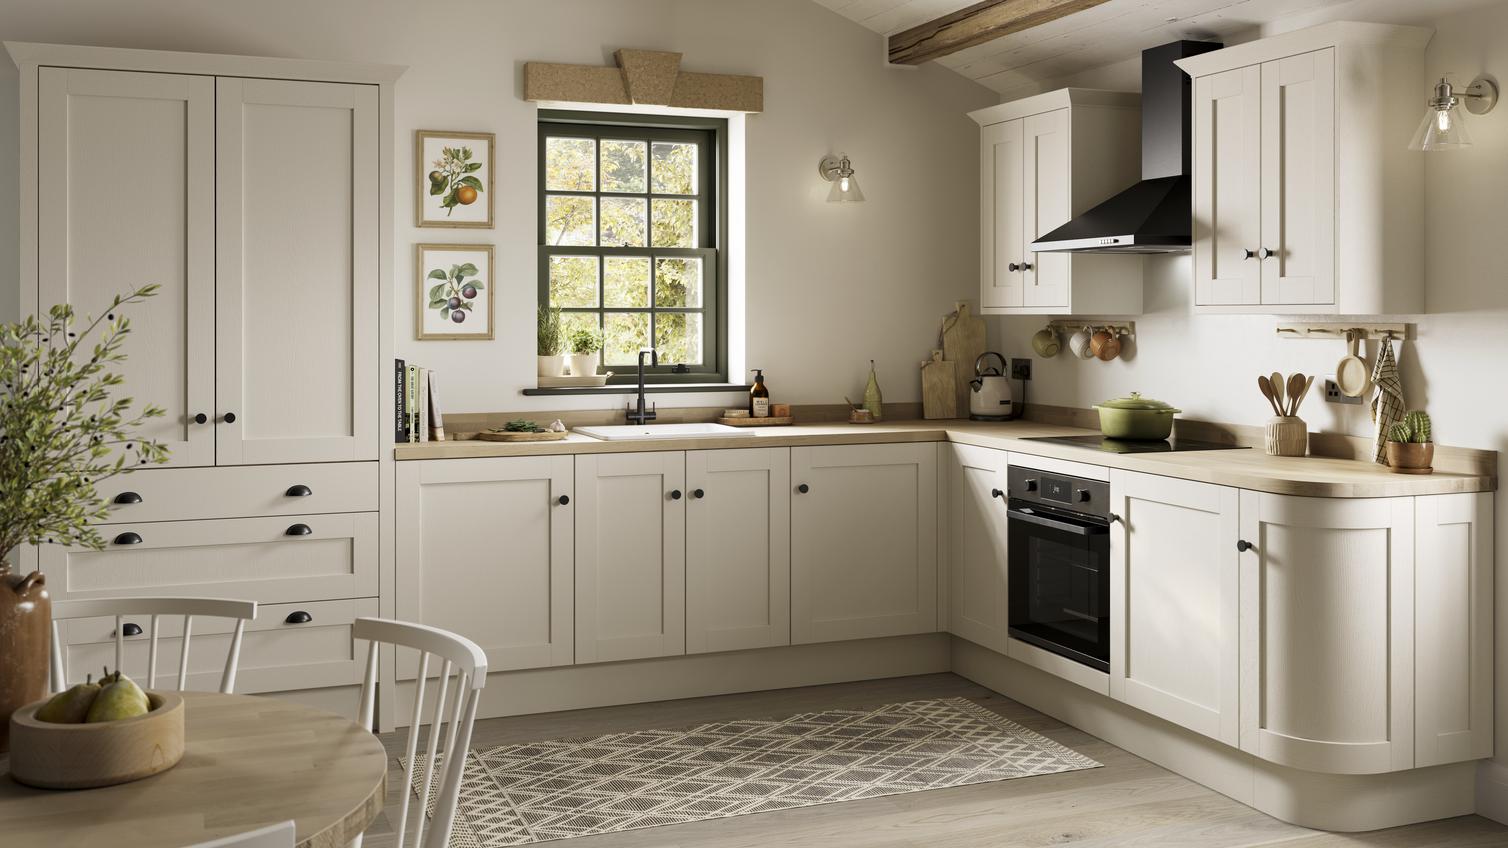 A white, shaker kitchen from the Halesworth porcelain range. It is in an l-shaped layout and features curved cabinet doors